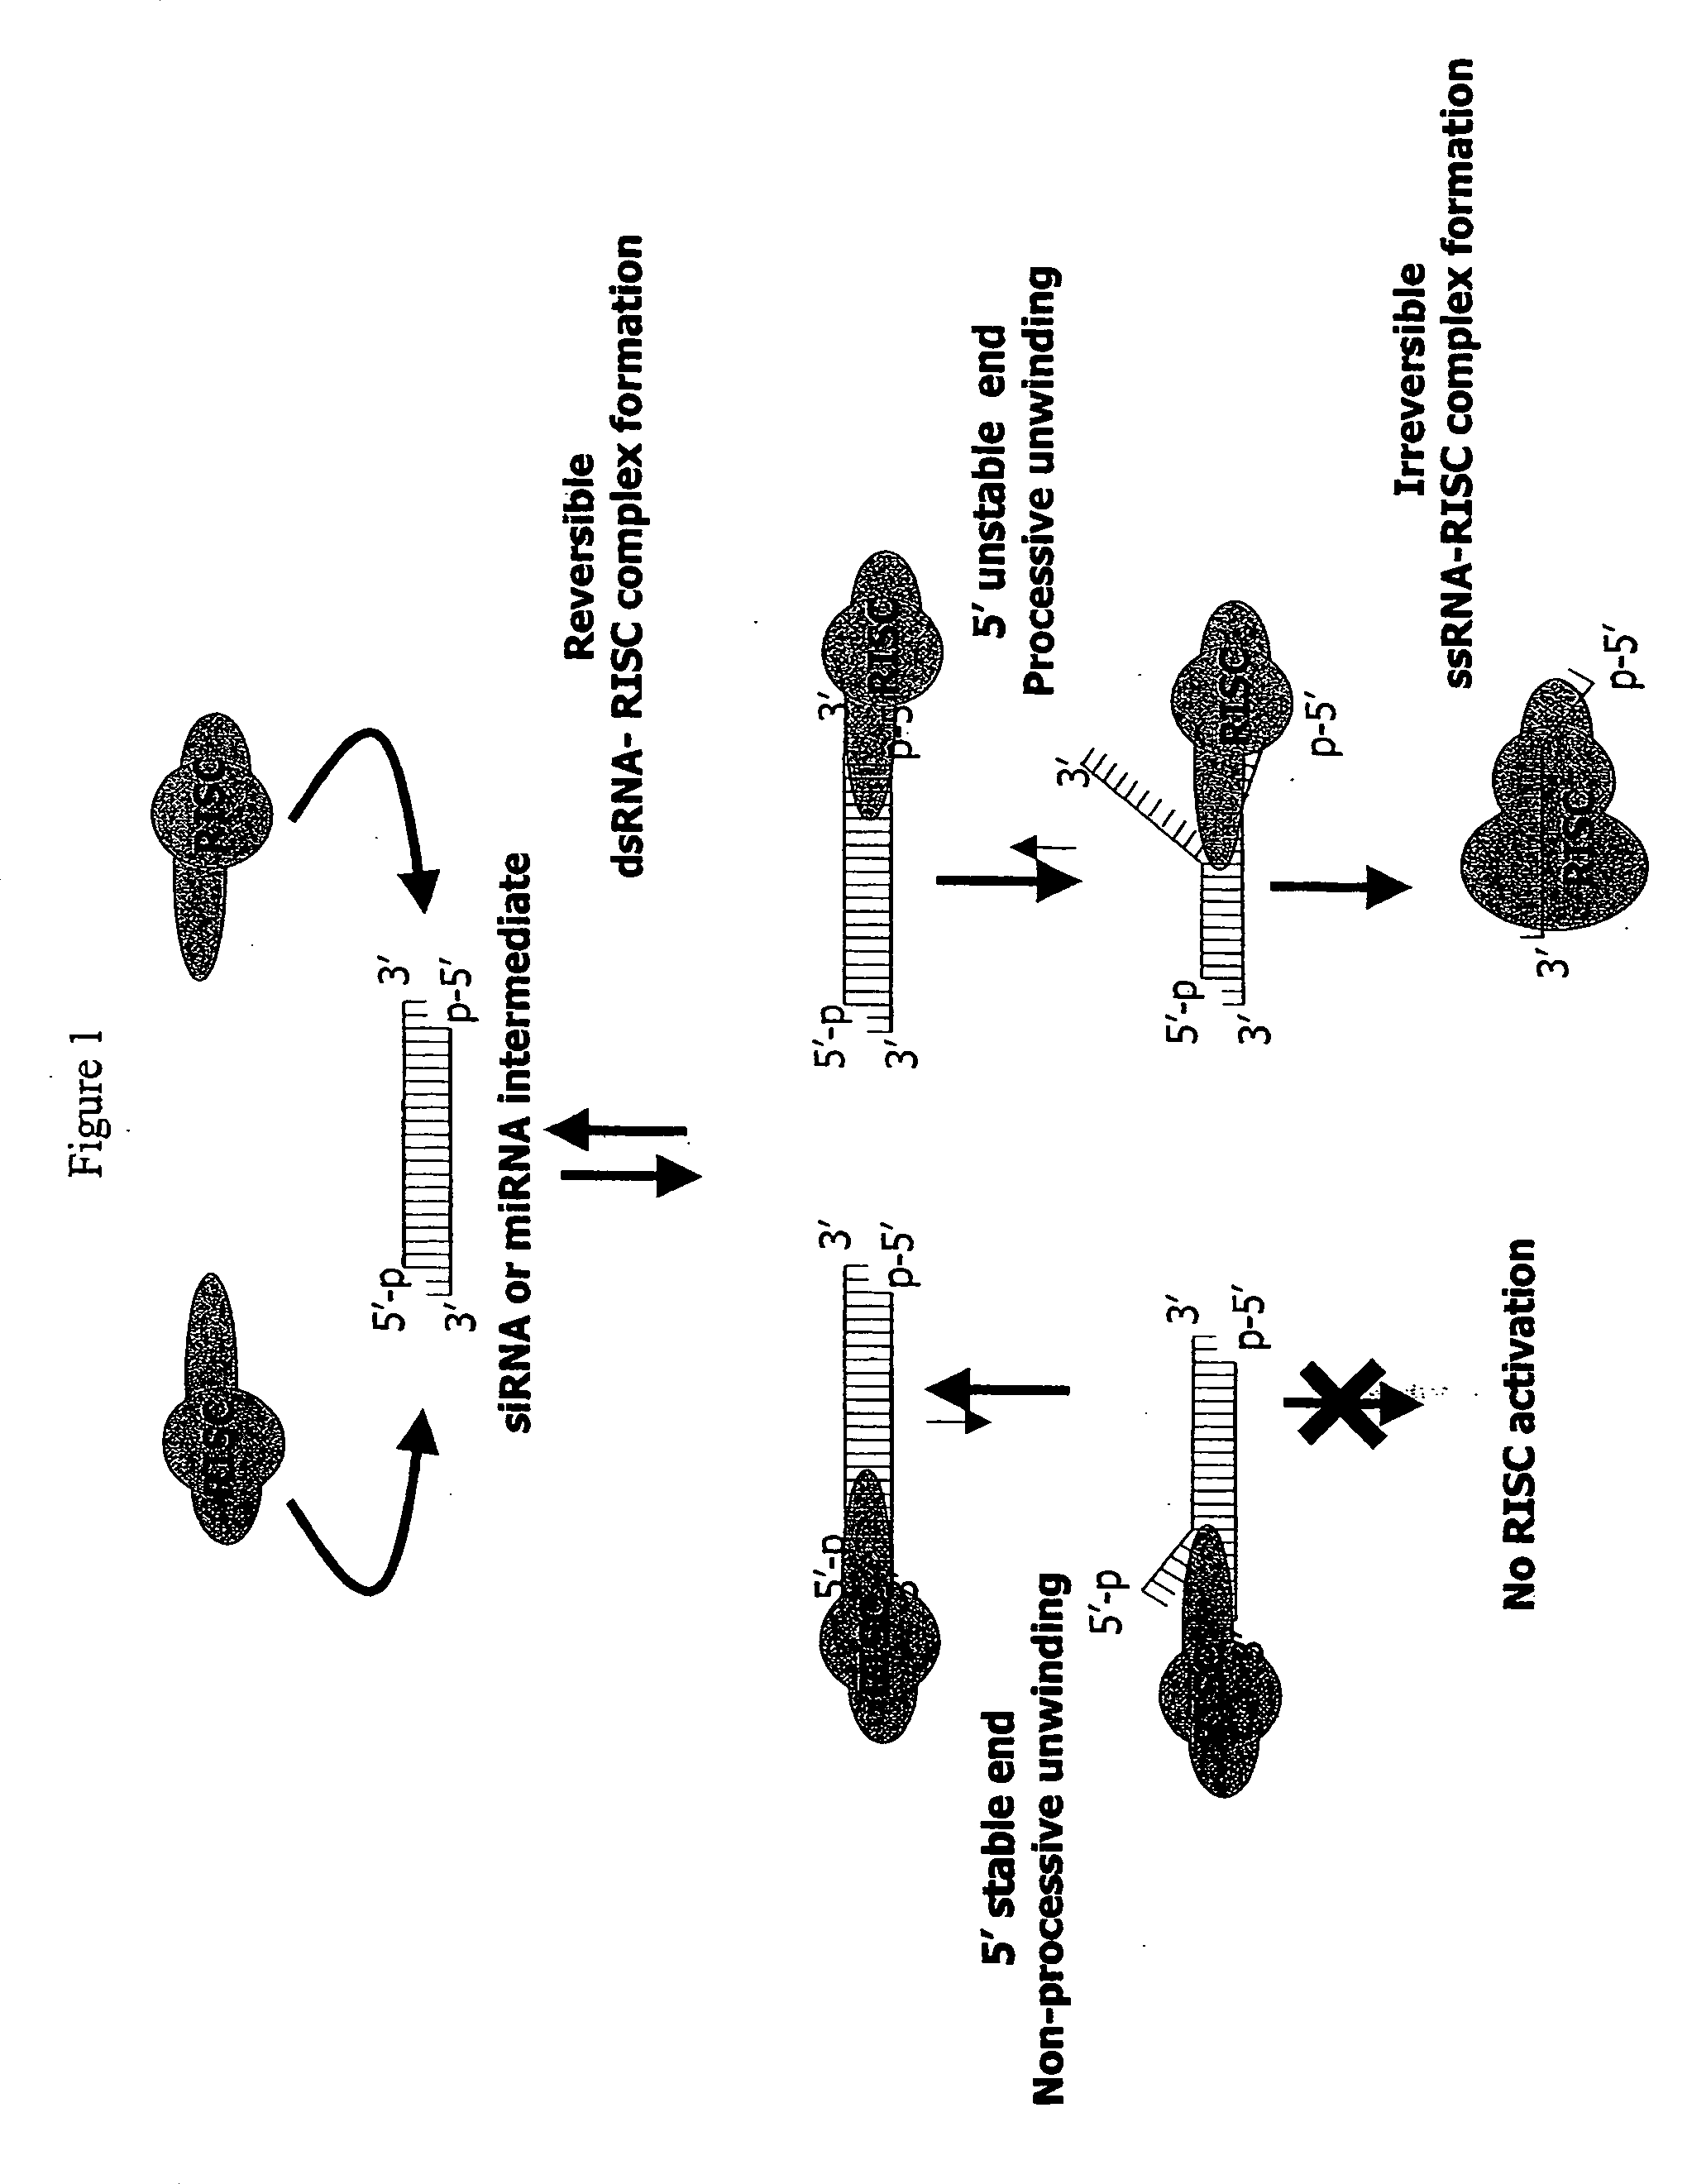 Functional and hyperfunctional siRNA directed against Bcl-2